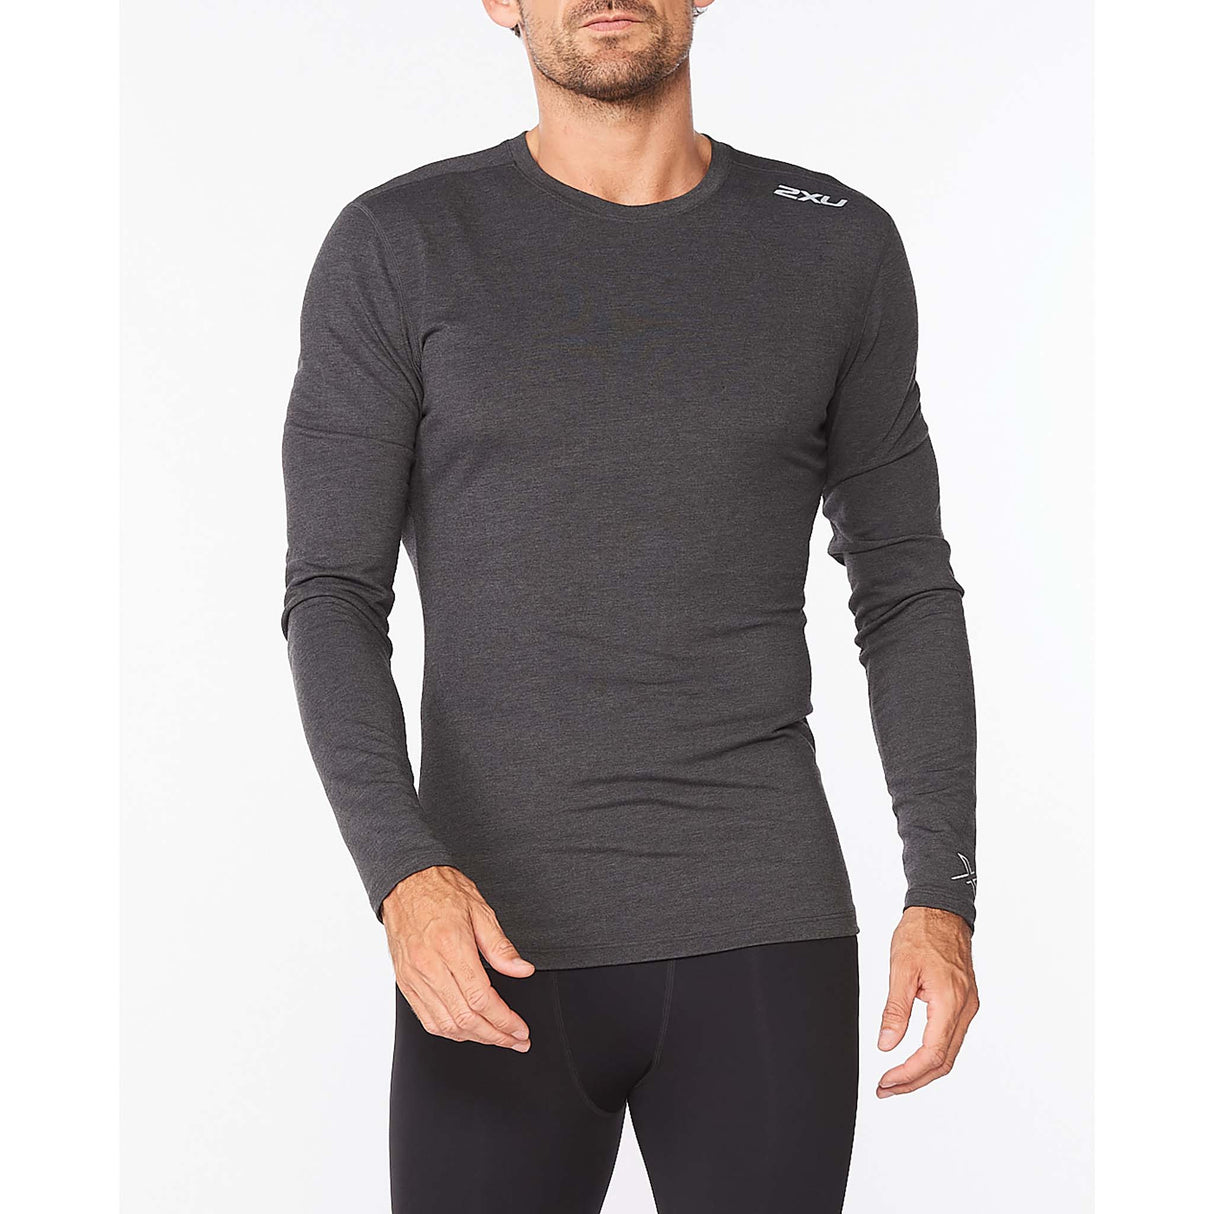 2XU Ignition chandail à manches longues baselayer homme face